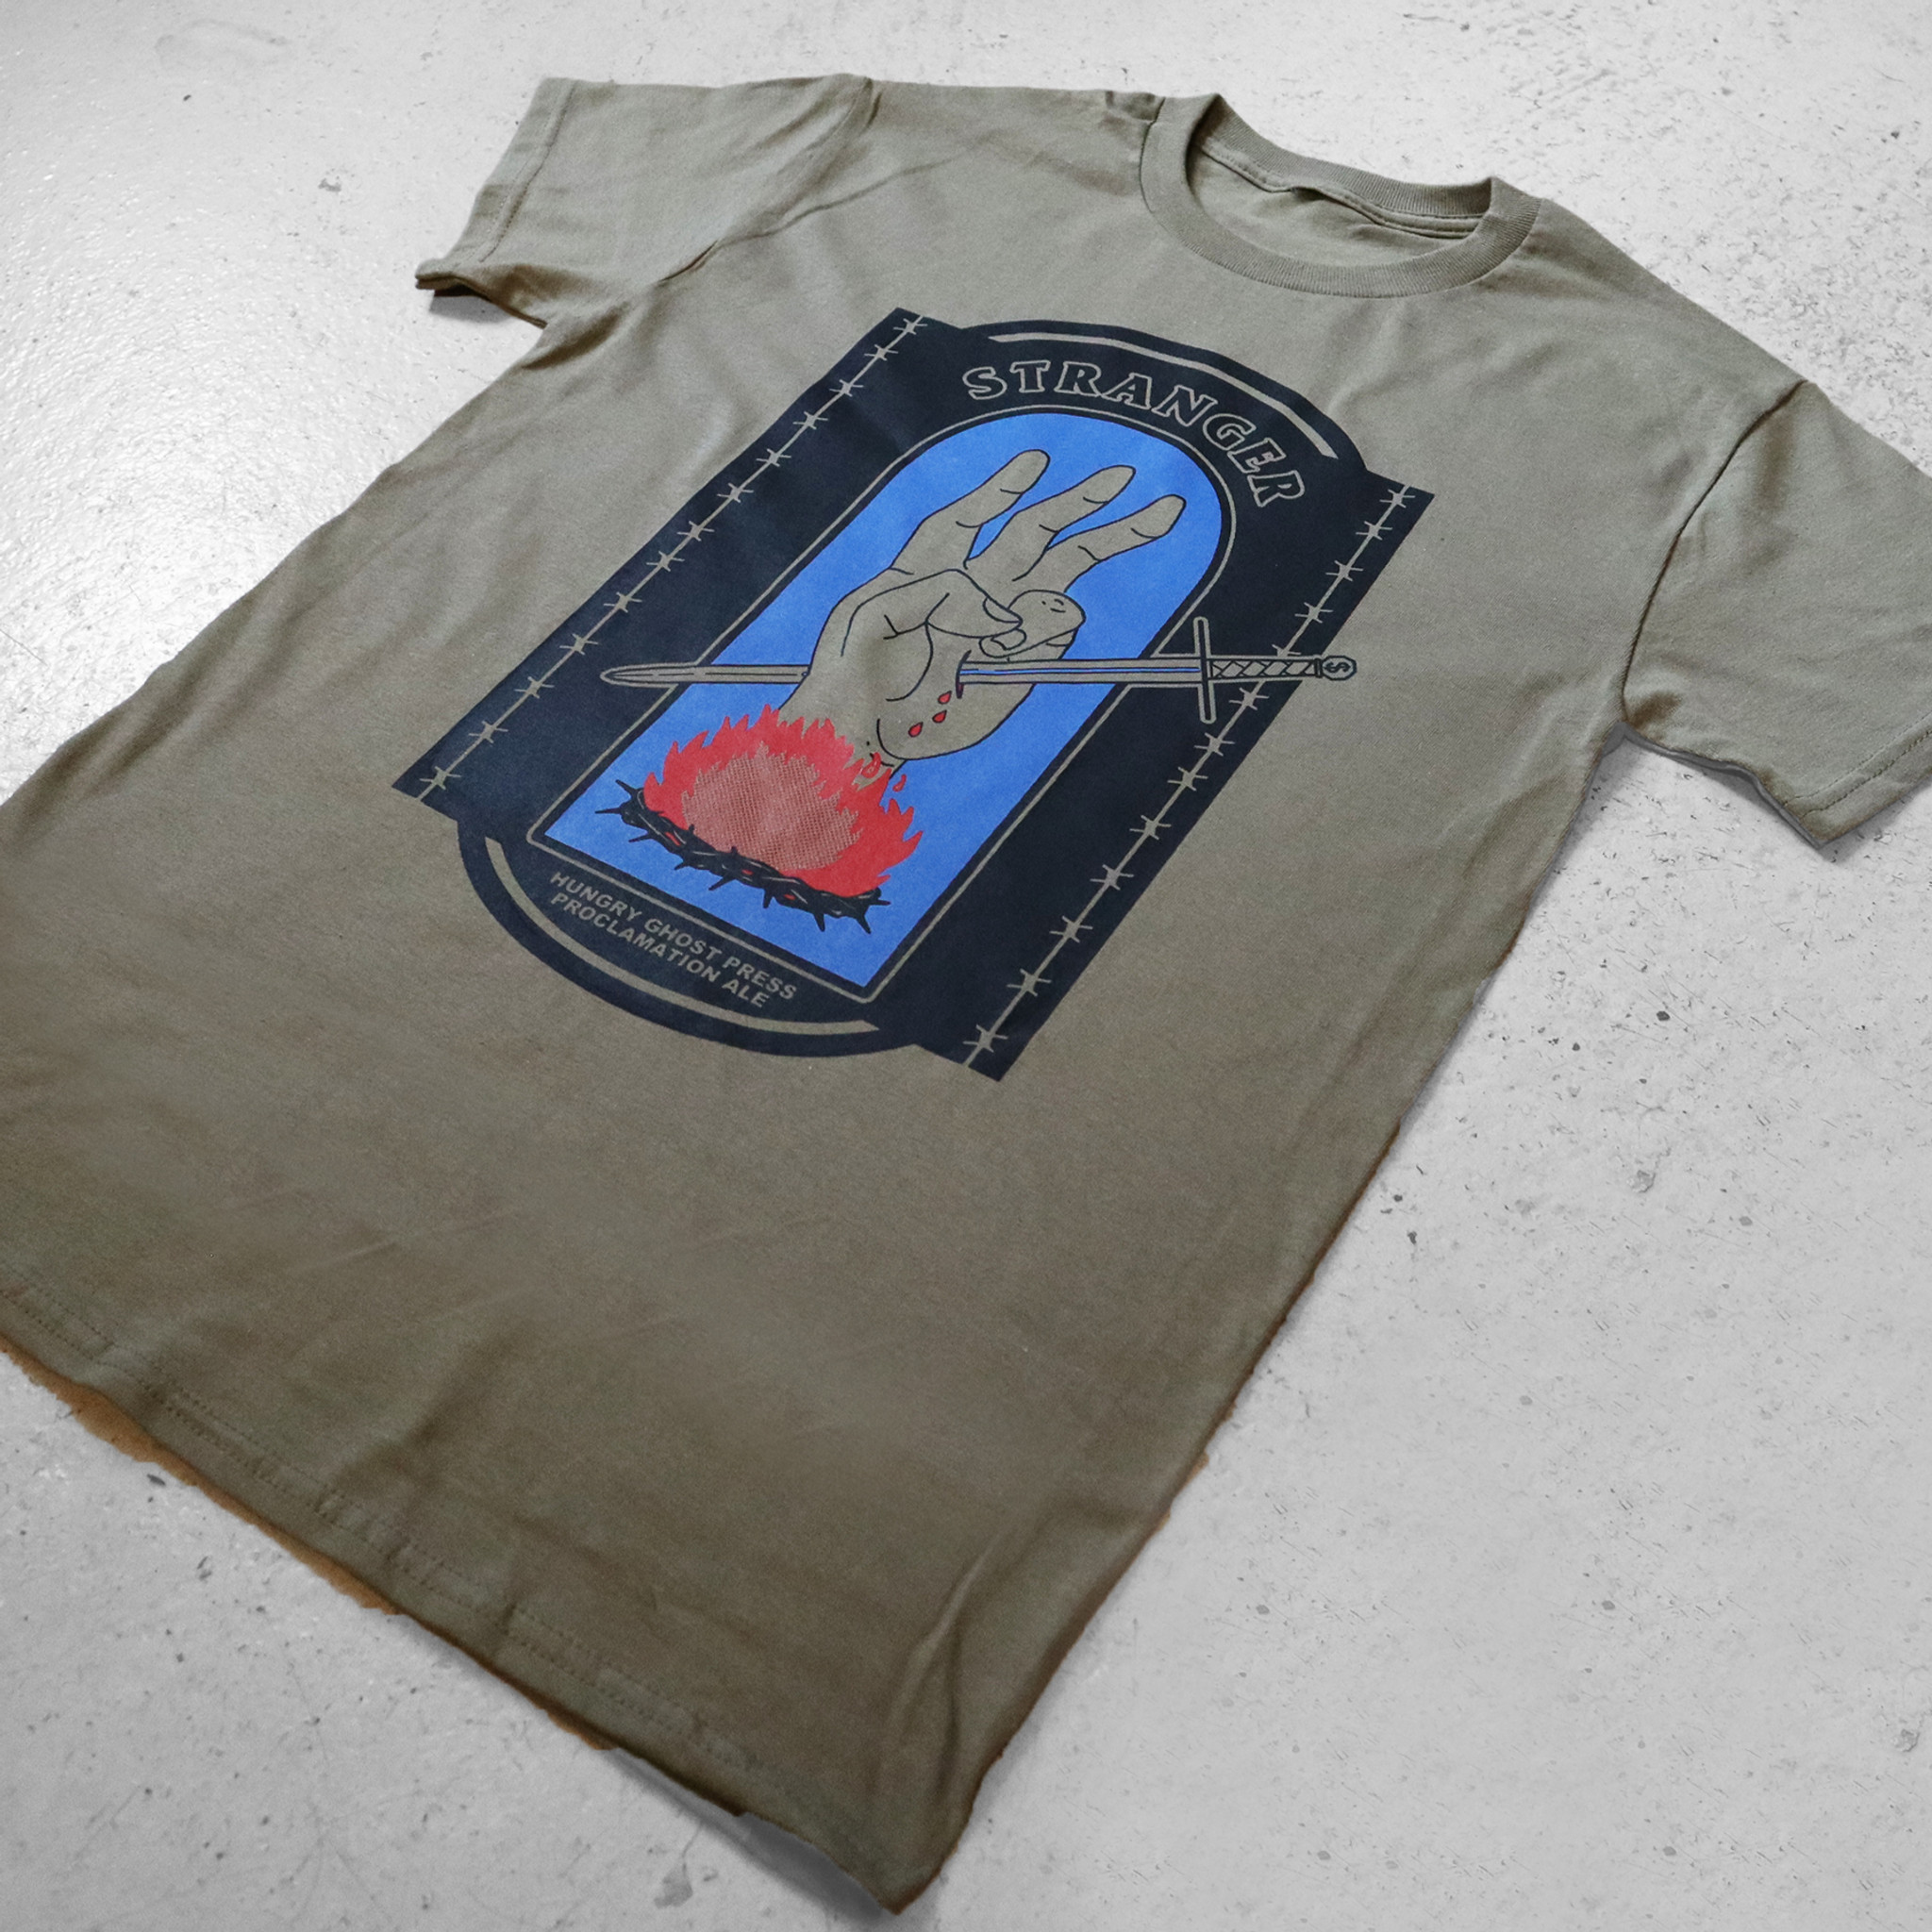 *PROMO* Stranger Proclamation Ale x Hungry Ghost Press Tee